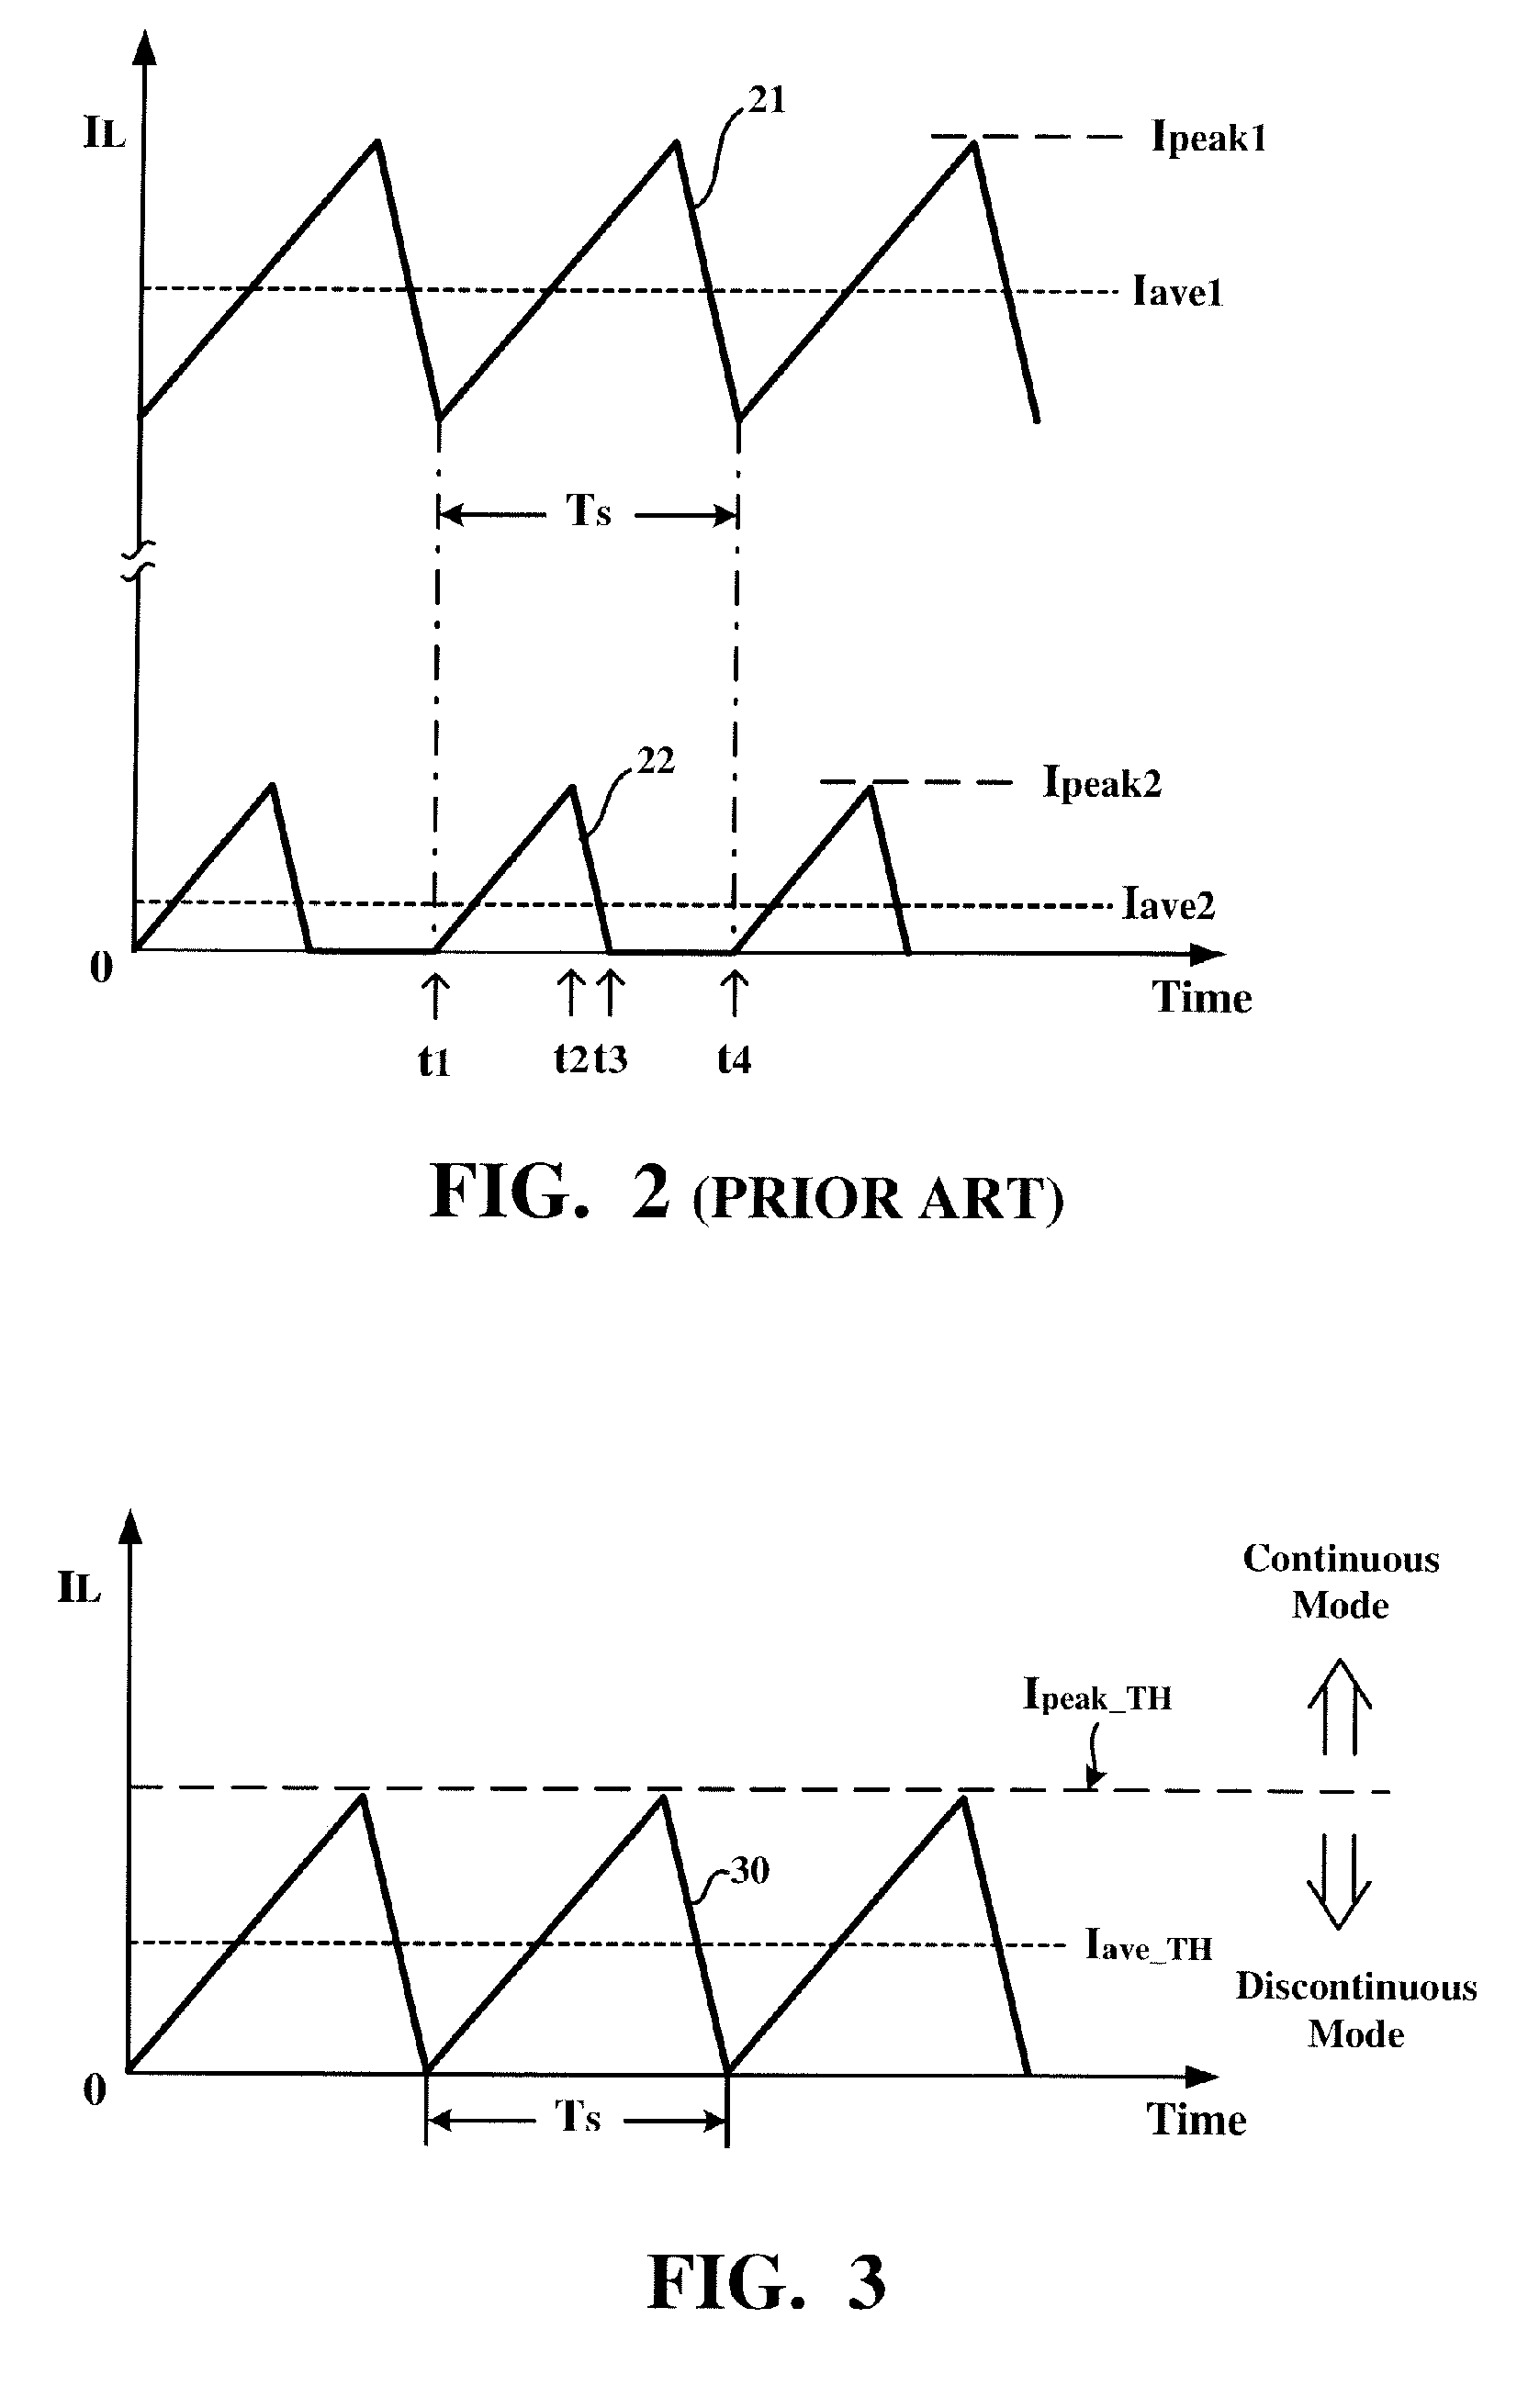 Switching voltage regulator operating without a discontinuous mode